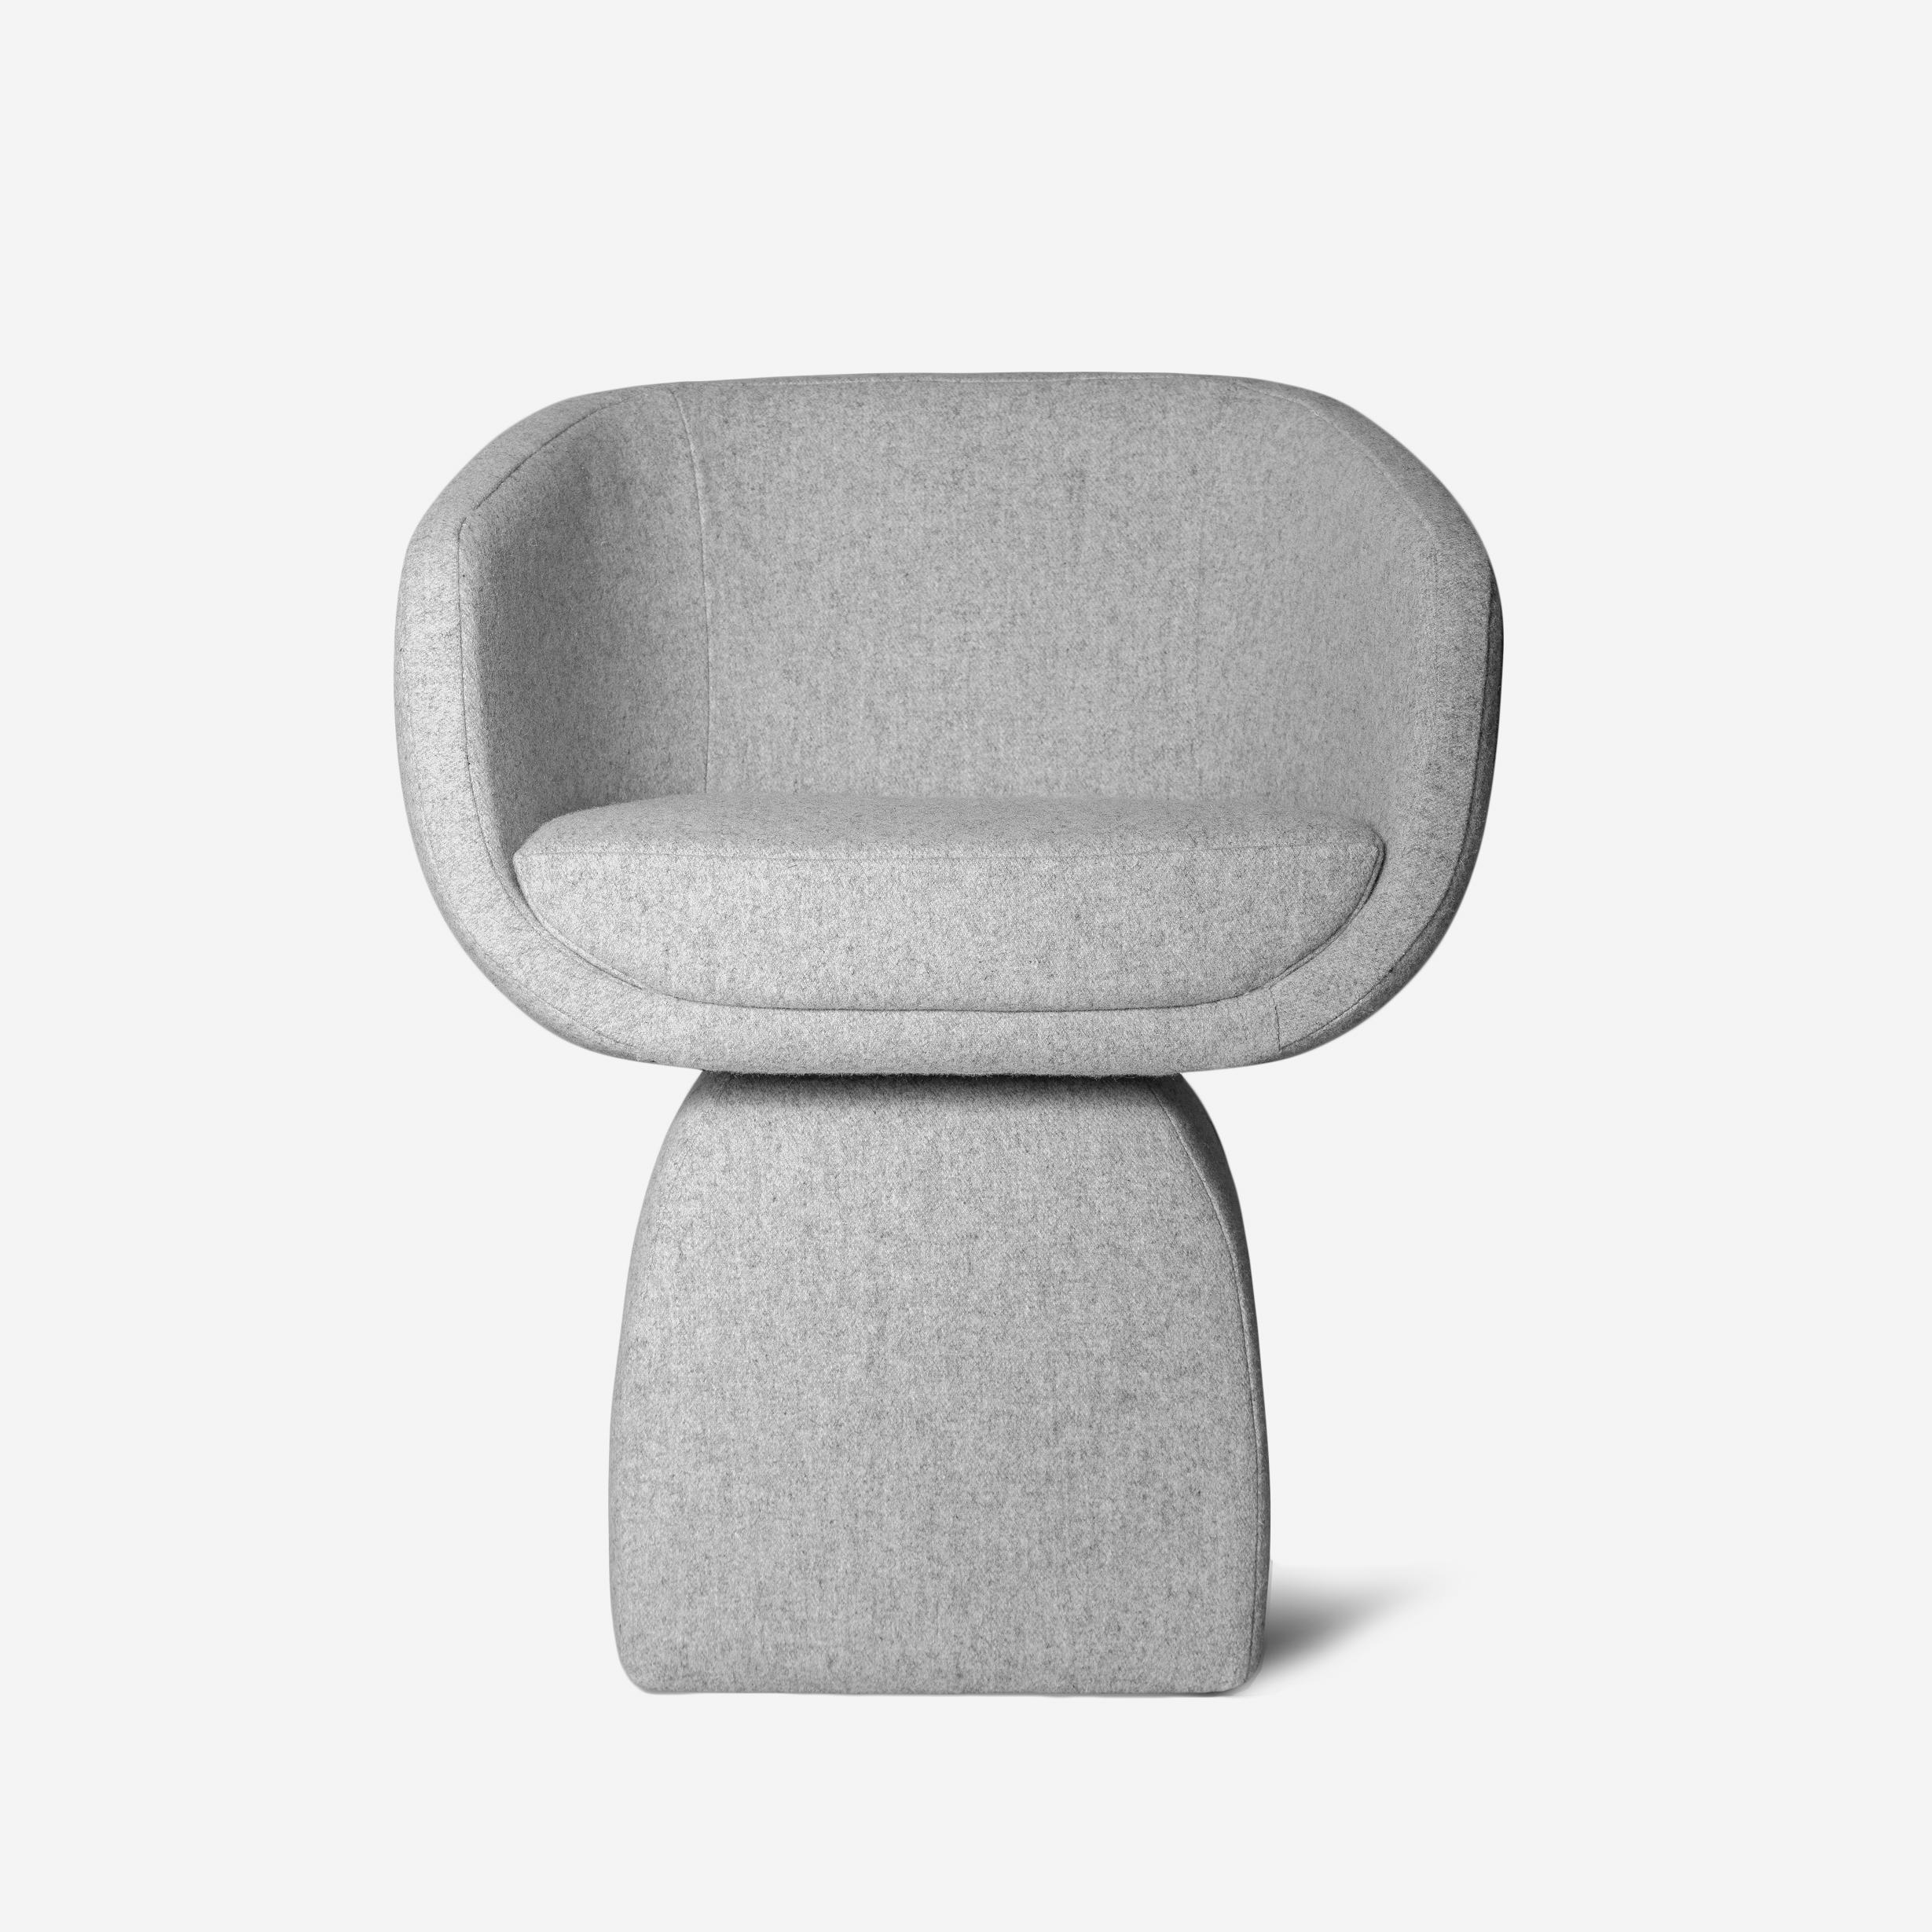 Oscar Chair, in a Special Wool Fabric, Handcrafted in Portugal by Duistt

Inspired by the poetic curved lines of Oscar Niemeyer’s architecture, Oscar chair allures for its sensual and free-flowing curves. Like Niemeyer once said “Curves make up the